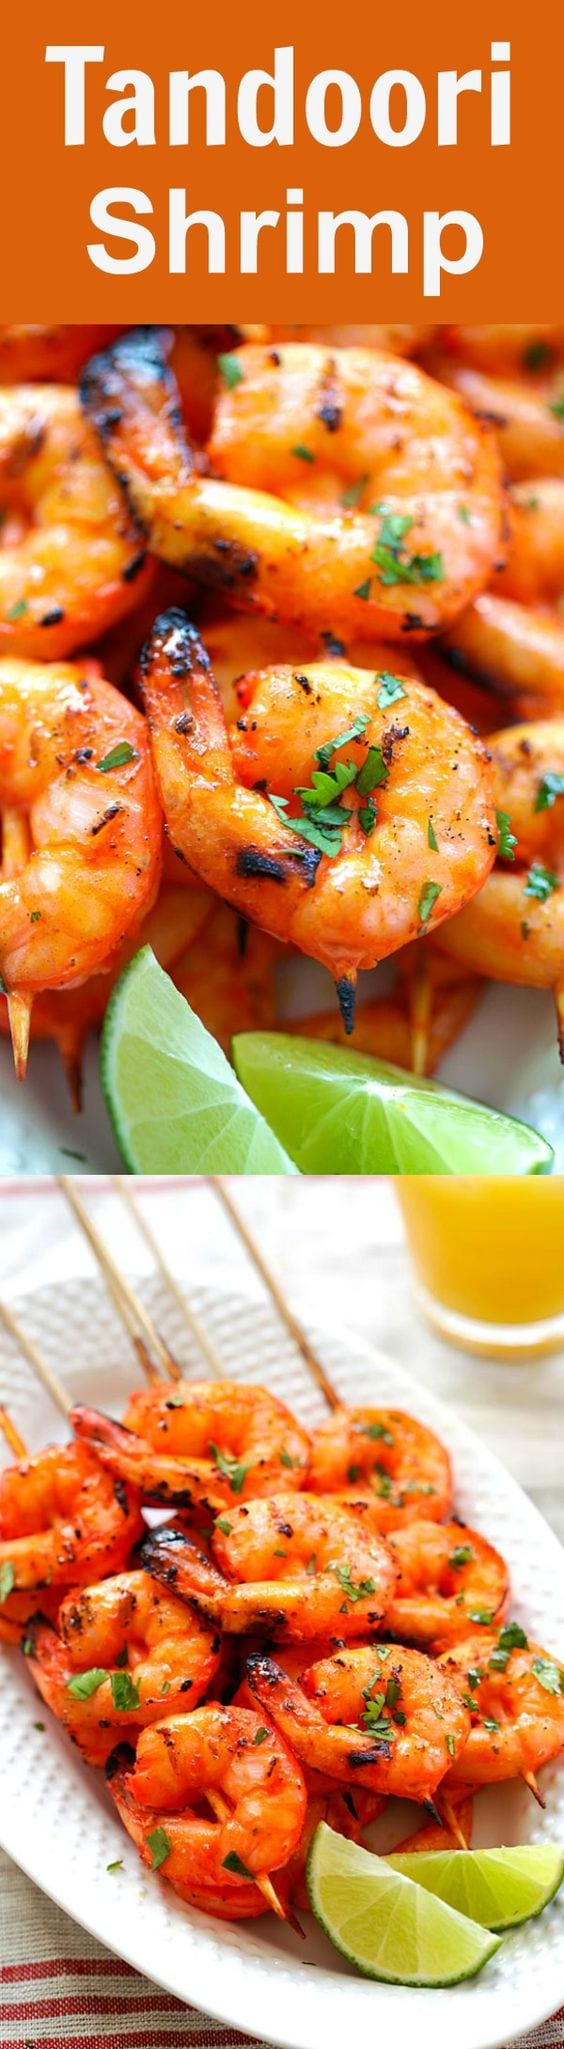 Tandoori Shrimp - perfectly marinated and grilled Indian Tandoori shrimp skewers. Super easy recipe that yields the most delicious shrimp ever | rasamalaysia.com